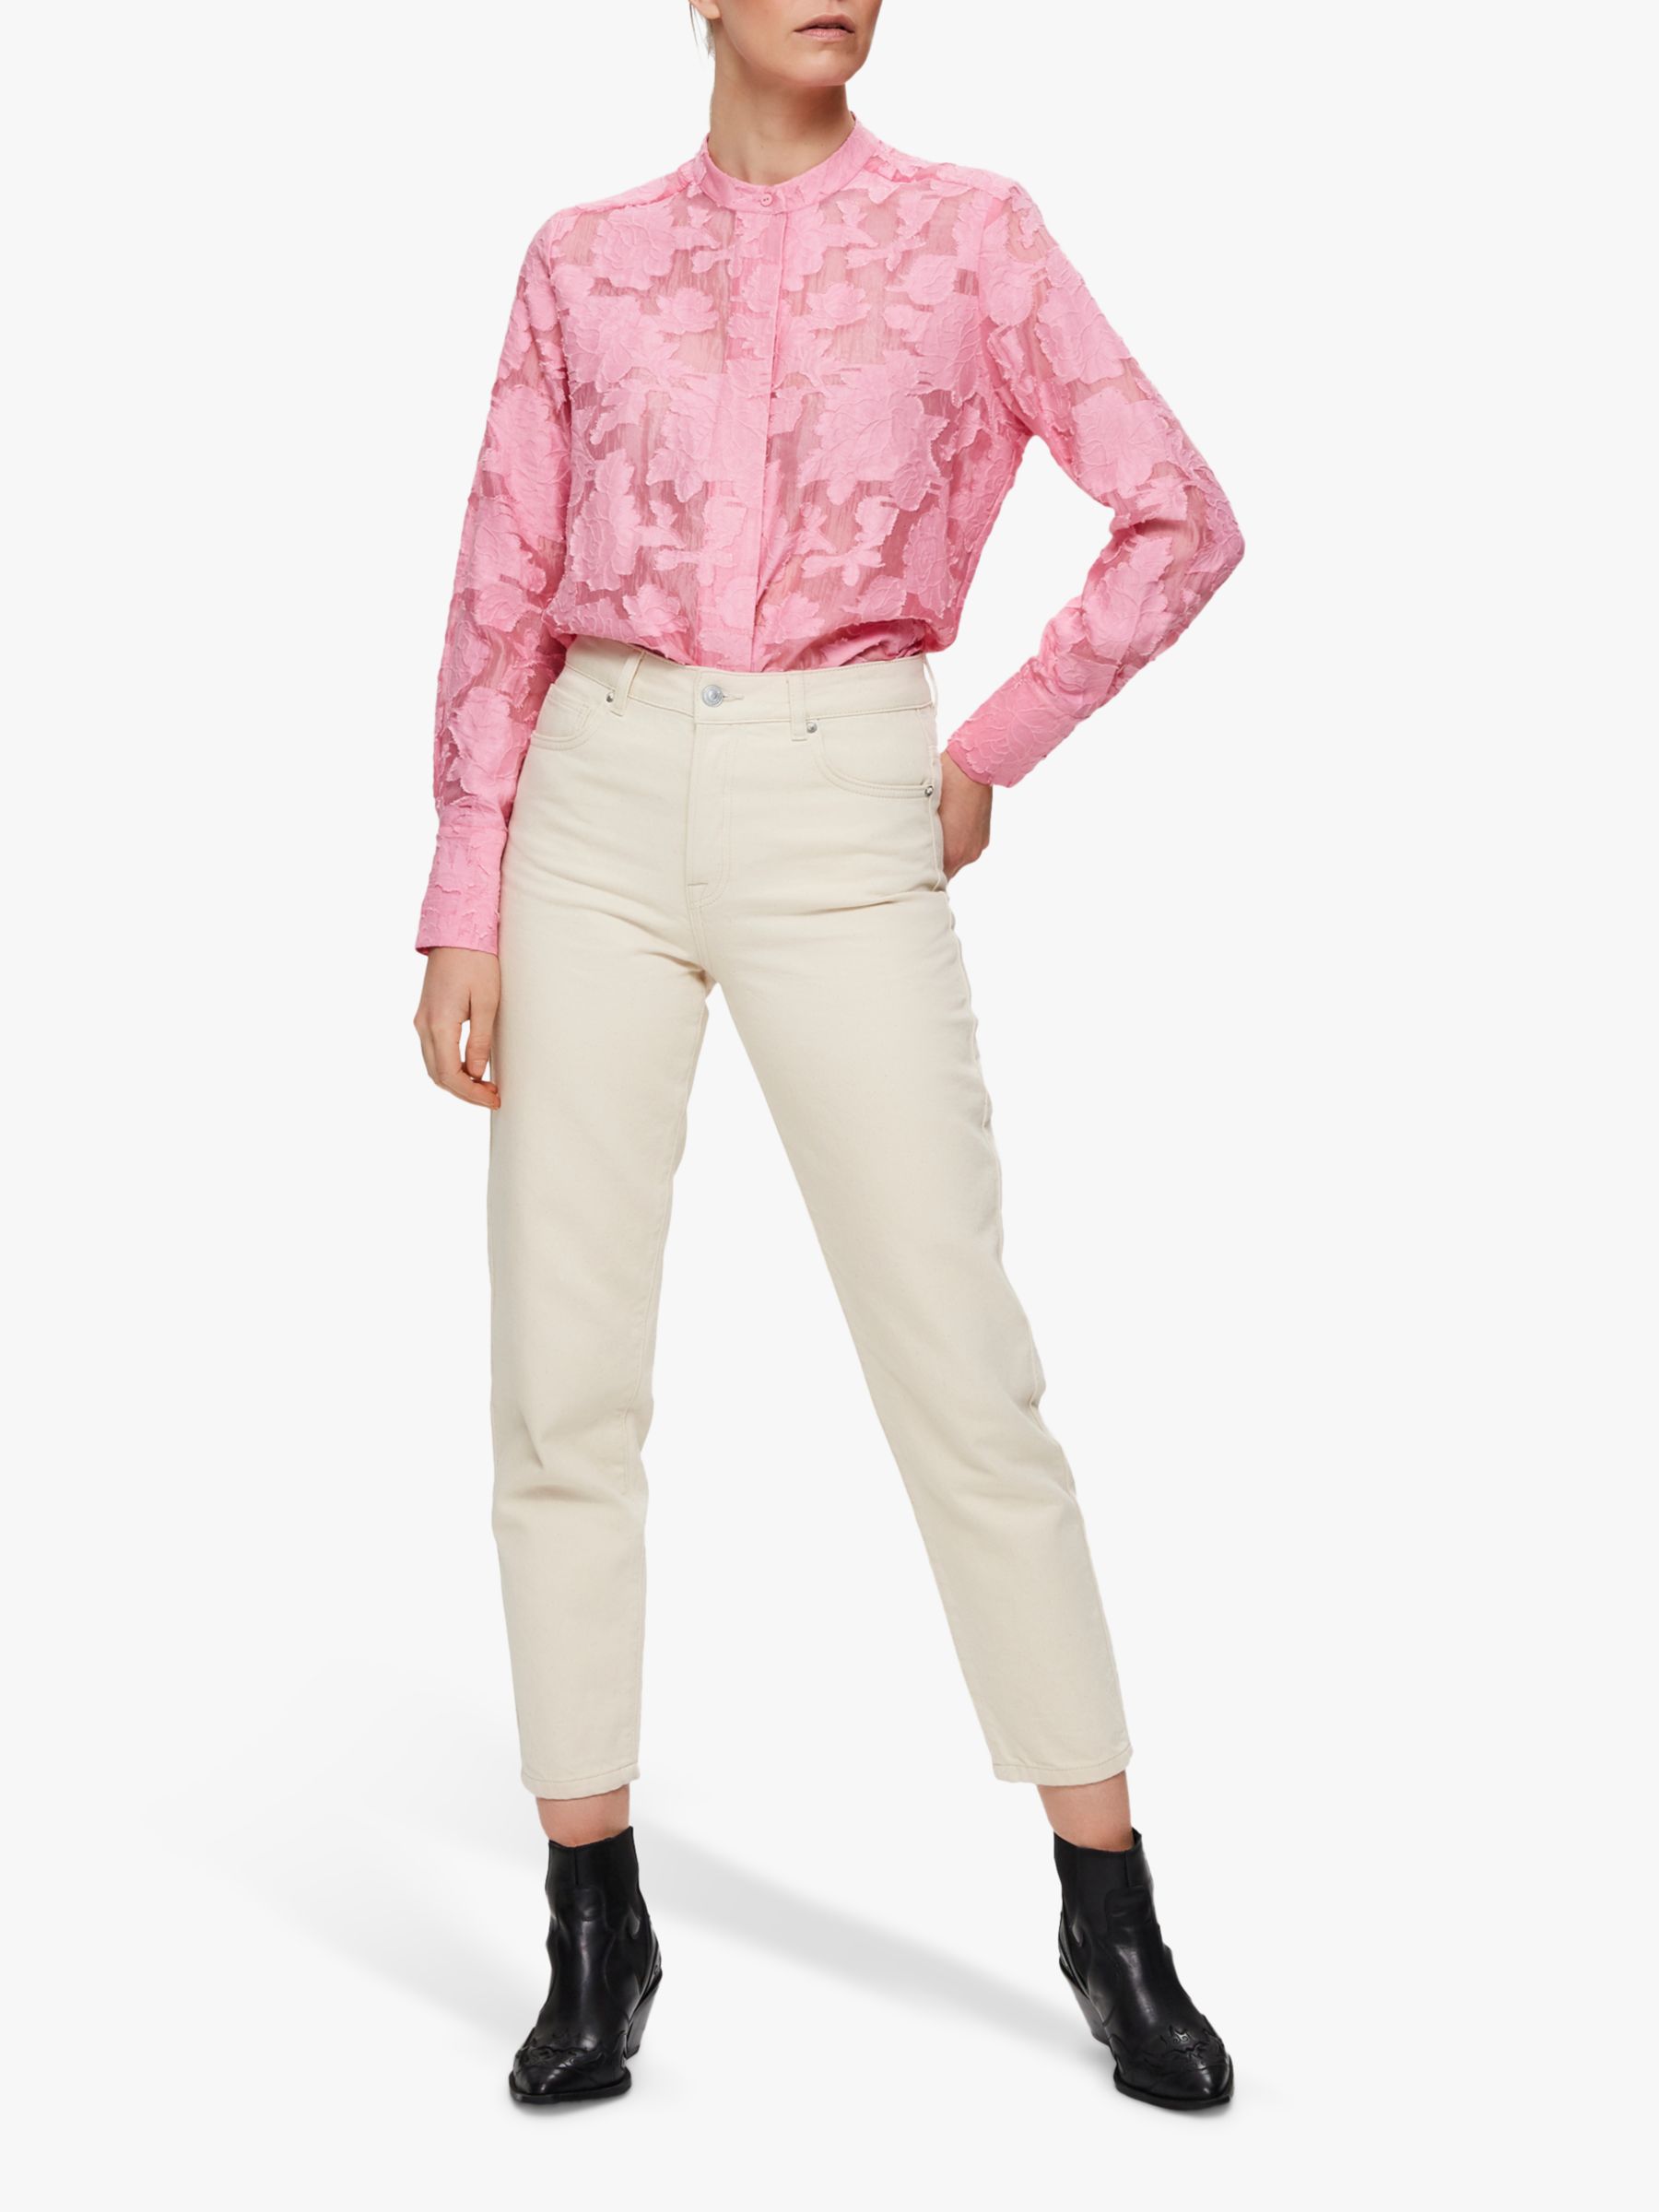 Selected Femme Sadie Floral Embroidered Shirt, Rose